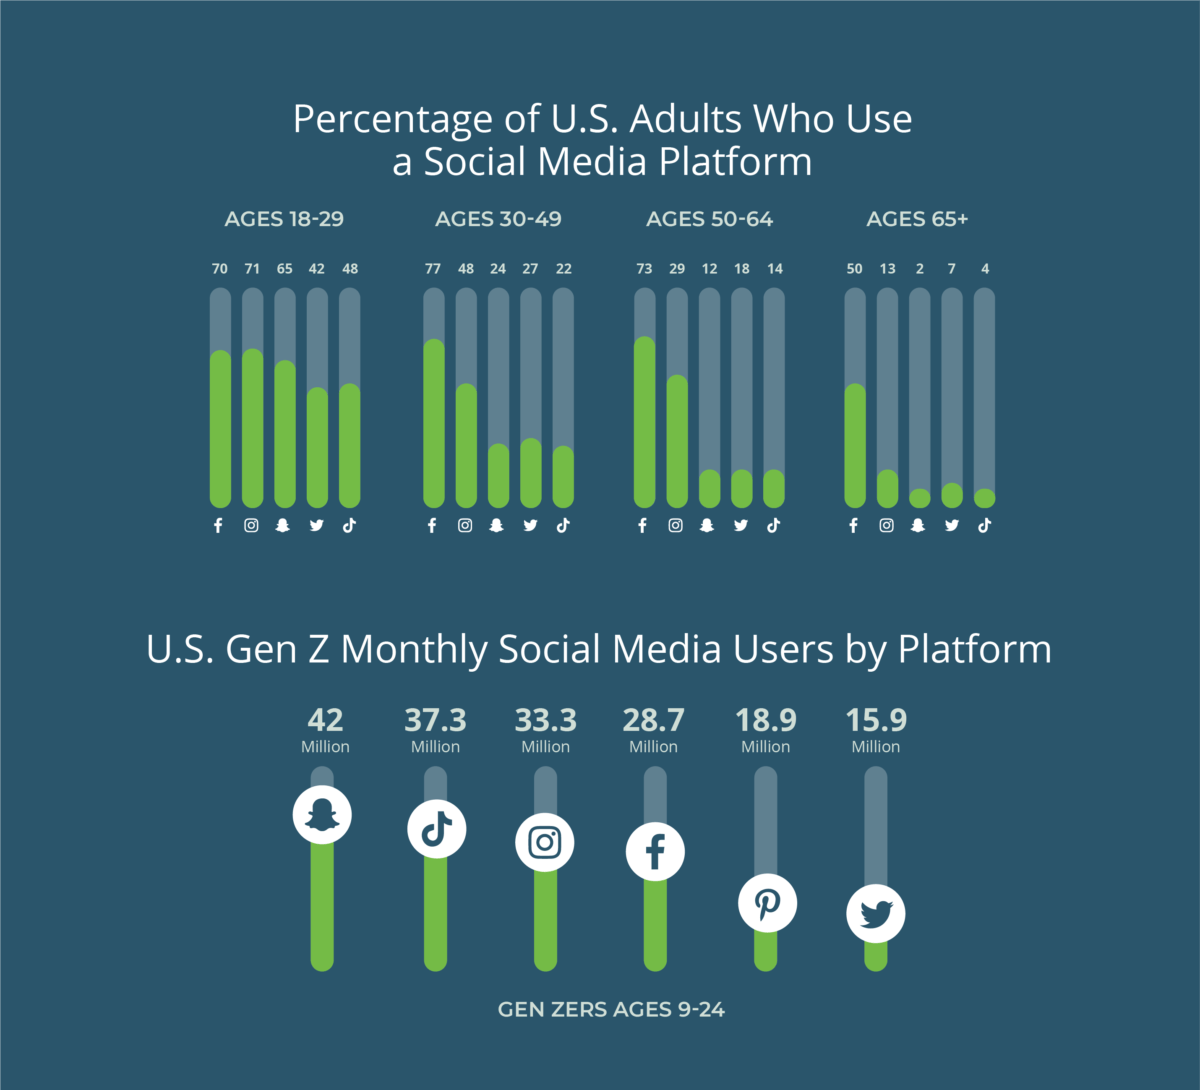 Blue background showing green line bar graphs of age ranges and different social media platforms.